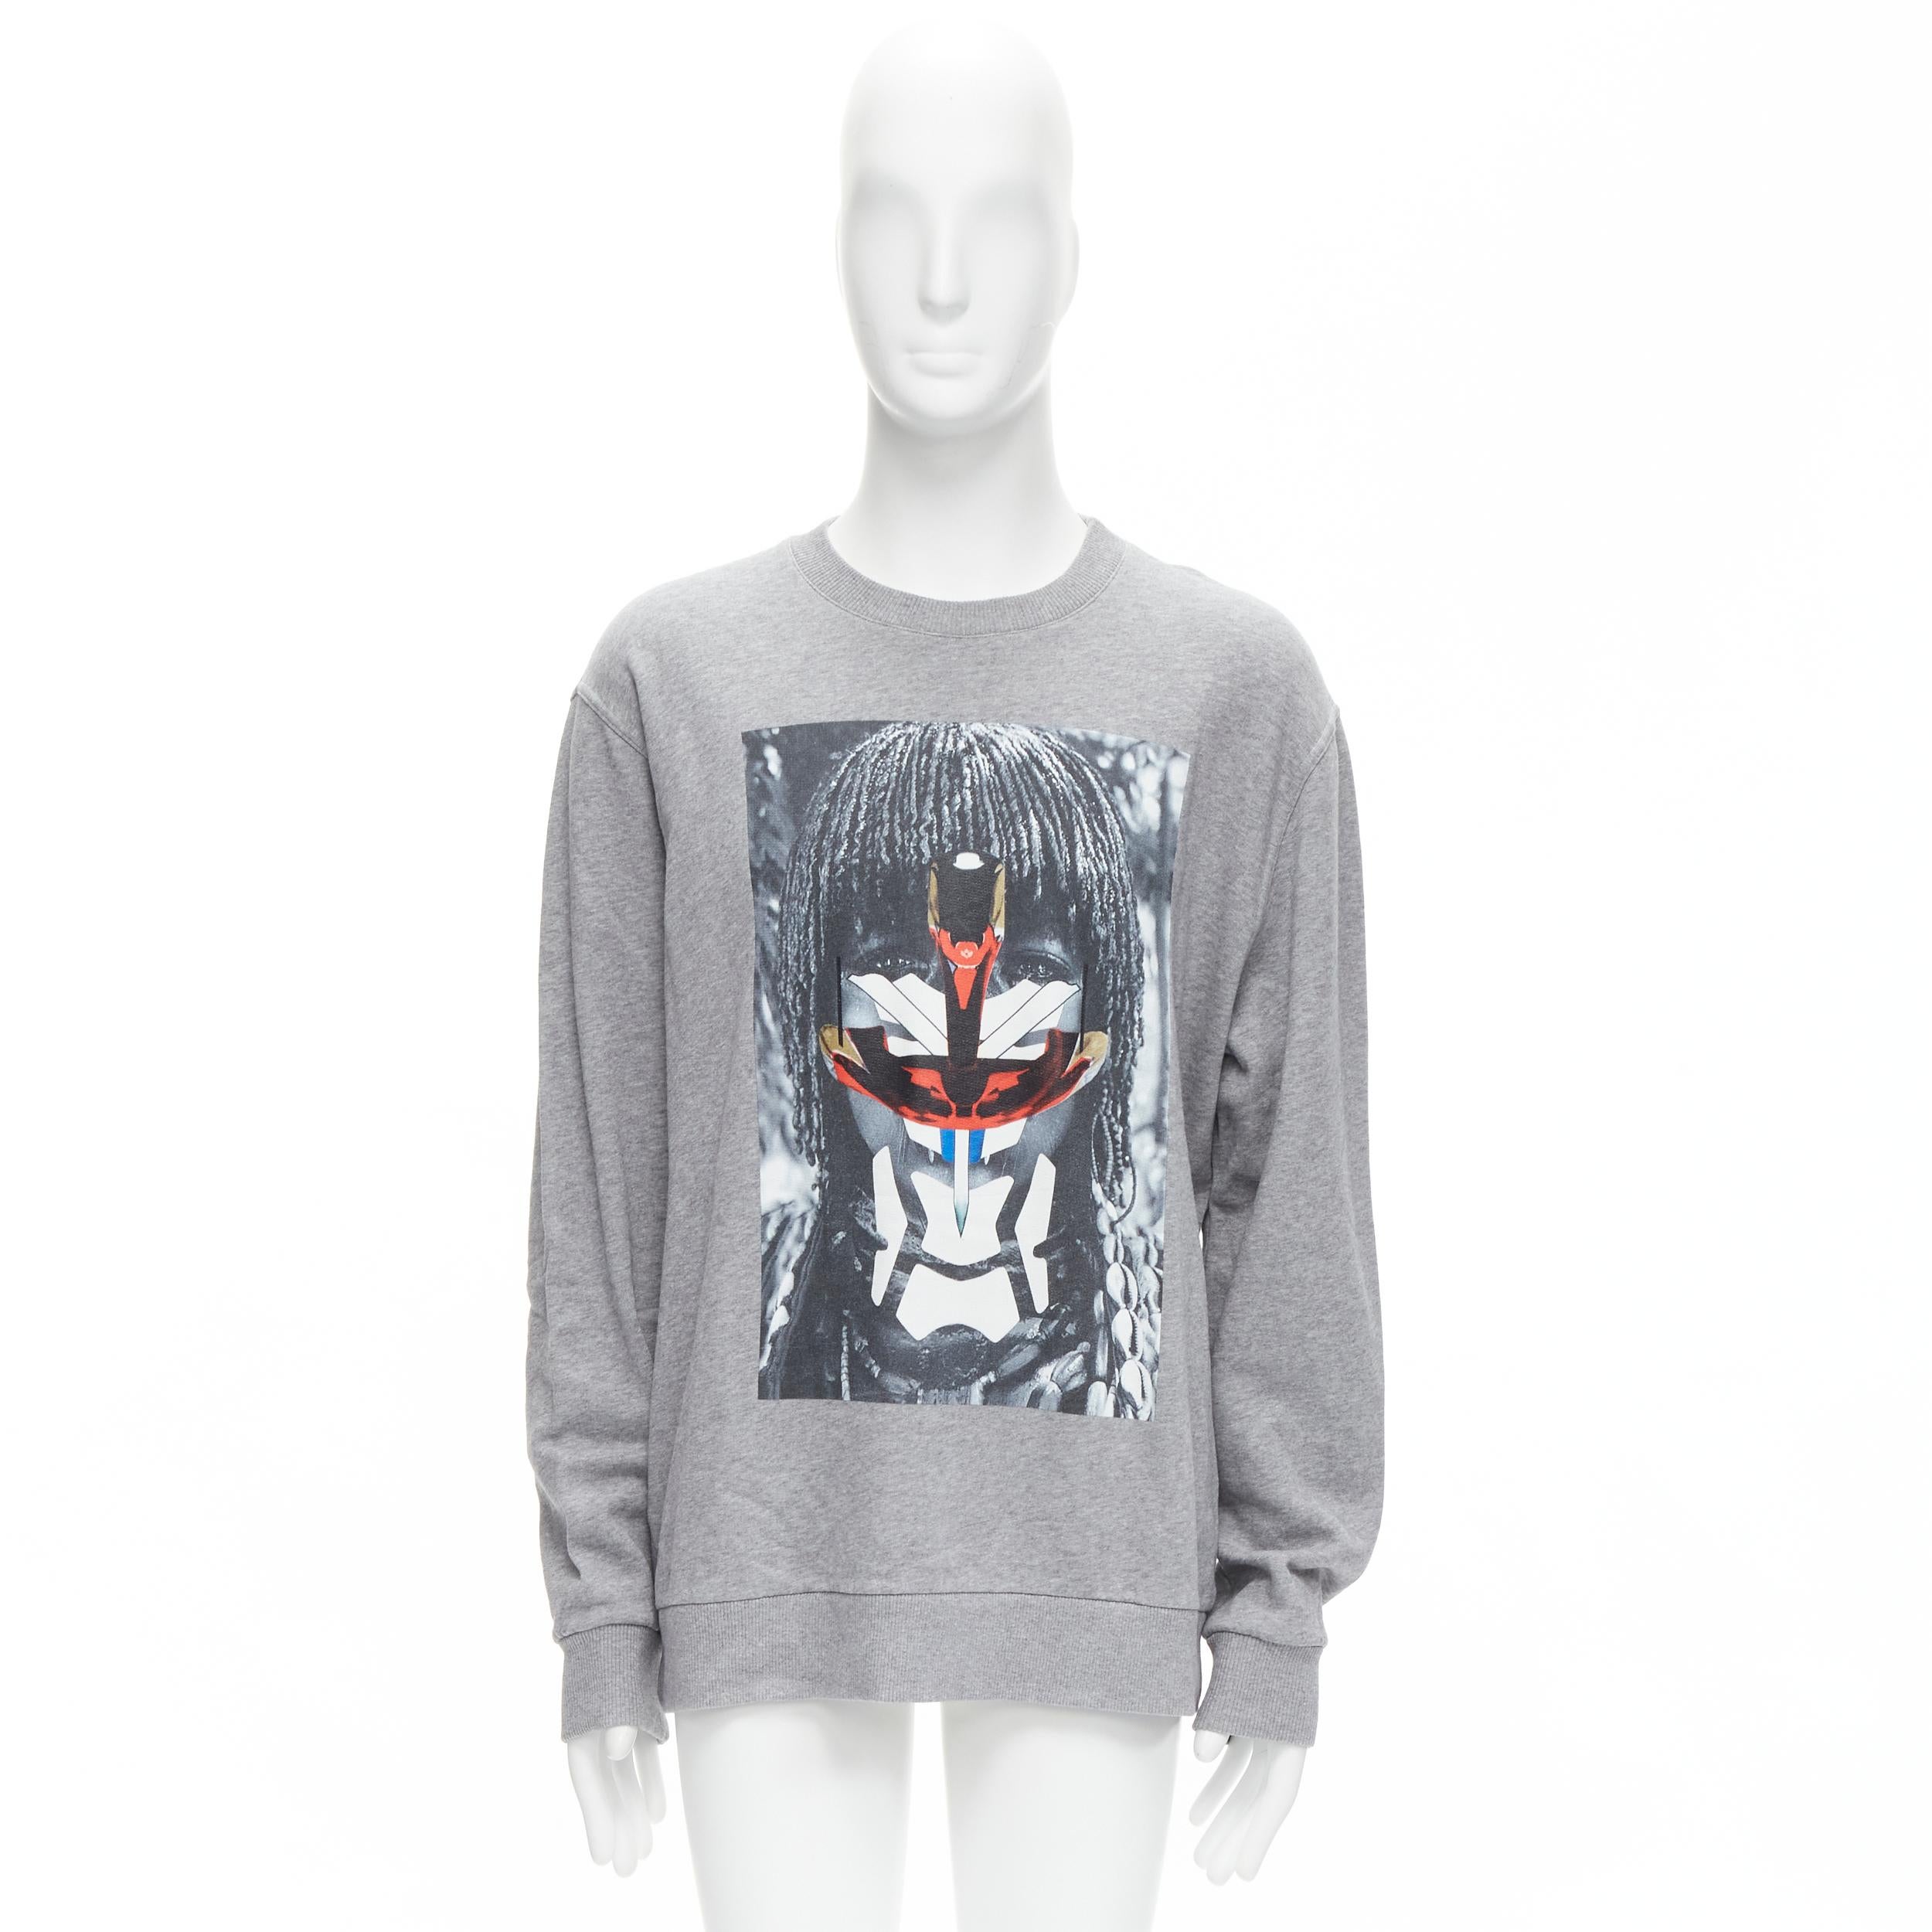 GIVENCHY Riccardo Tisci grey tribal girl graphic print cotton crew sweater S For Sale 4